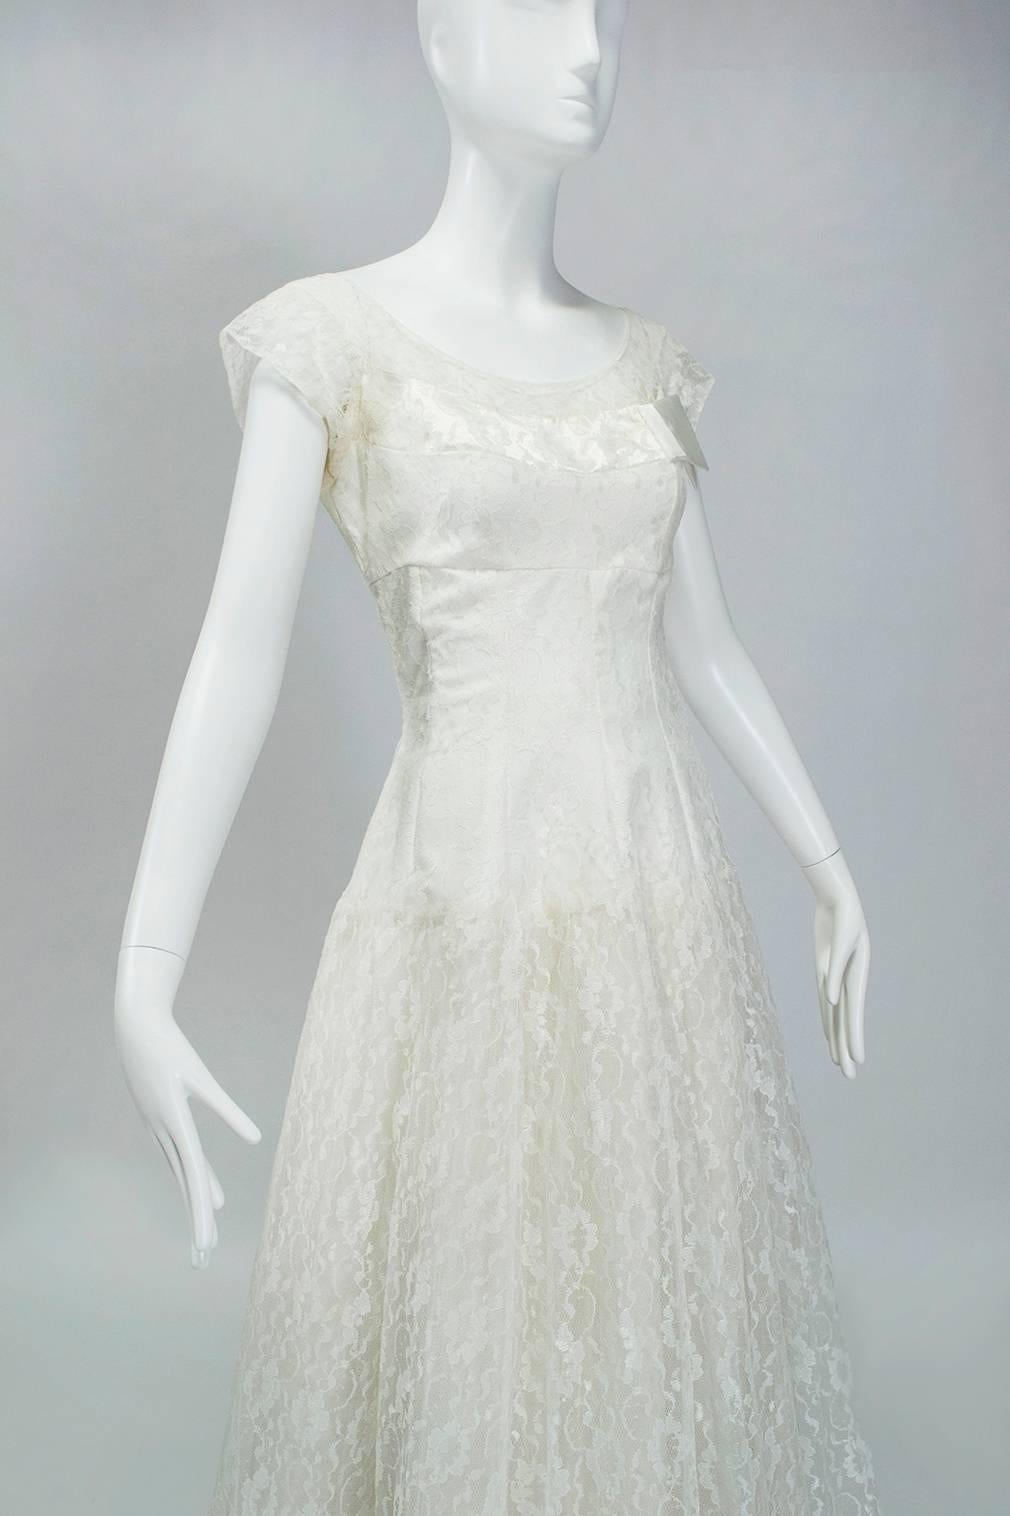 Ivory Lace Drop-Waist Wedding Gown with Bateau Neck - XS, 1950s In Good Condition For Sale In Tucson, AZ